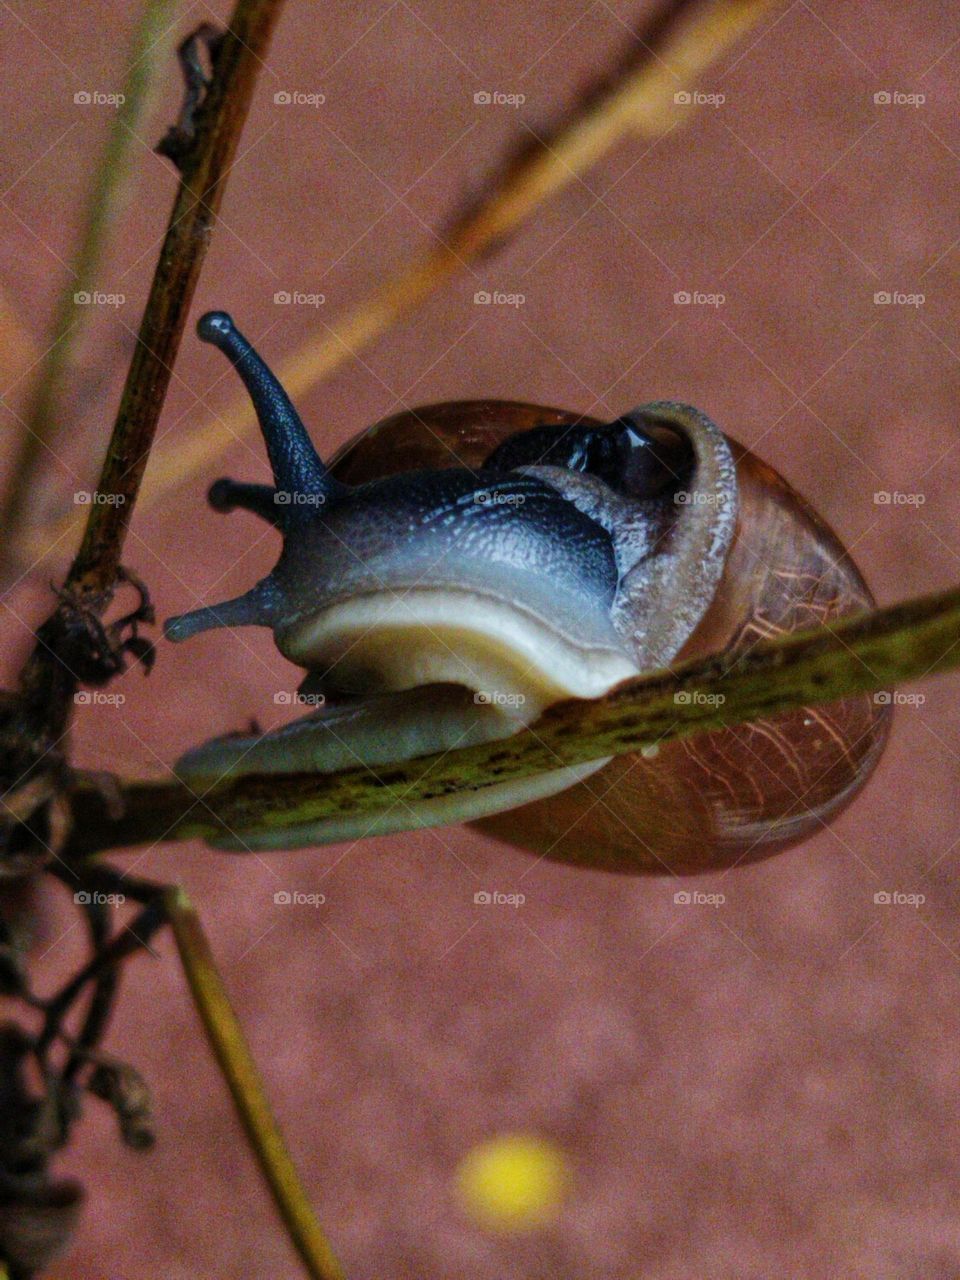 Snail in the park.